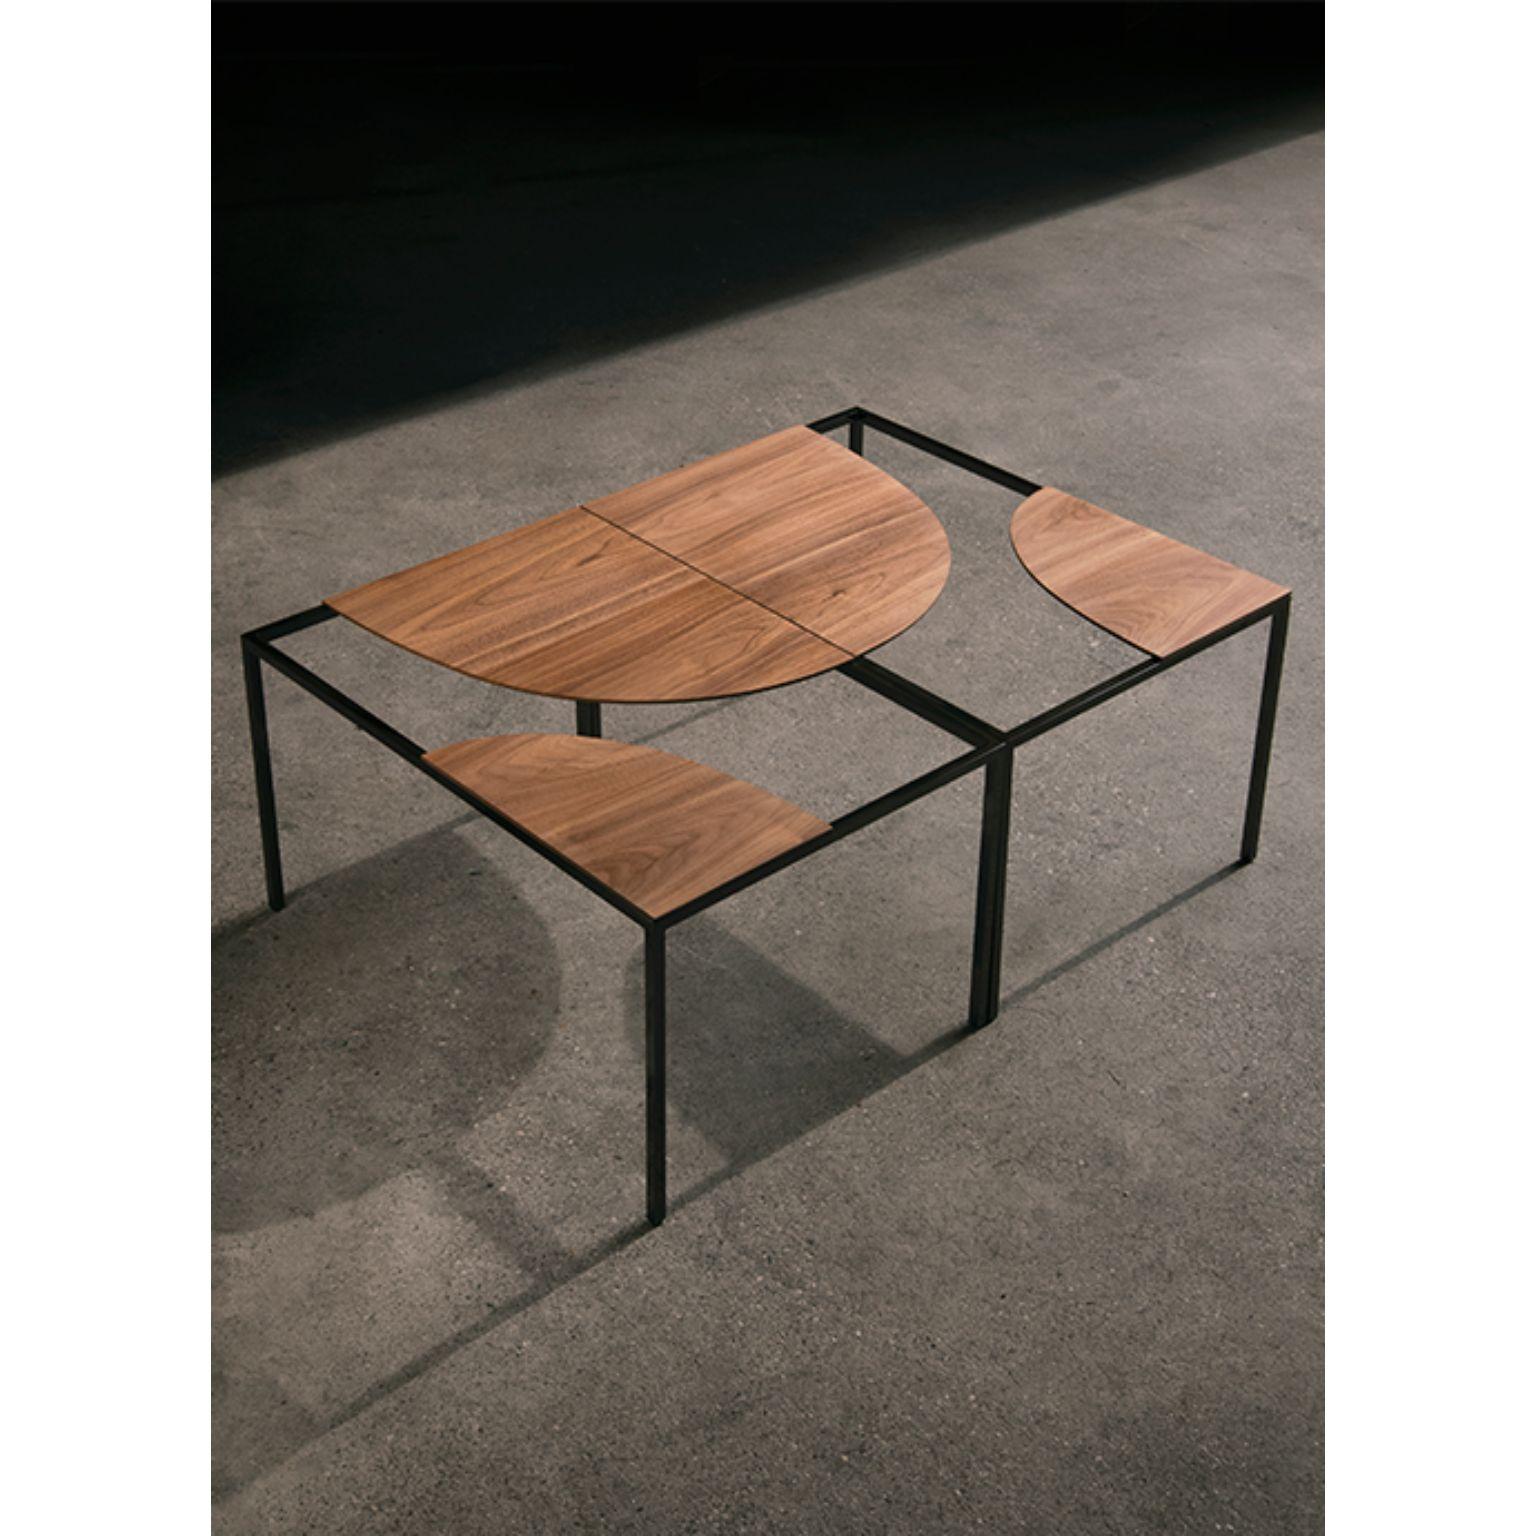 Set of 2 creek coffee table by Nendo
Materials: Top: solid wood (Also available in Powder coated metal)
 Structure: black chrome metal
Dimensions: W 90 x D 60 x H 31.7 cm

Creek is a table that suggests a stream of water flowing freely across